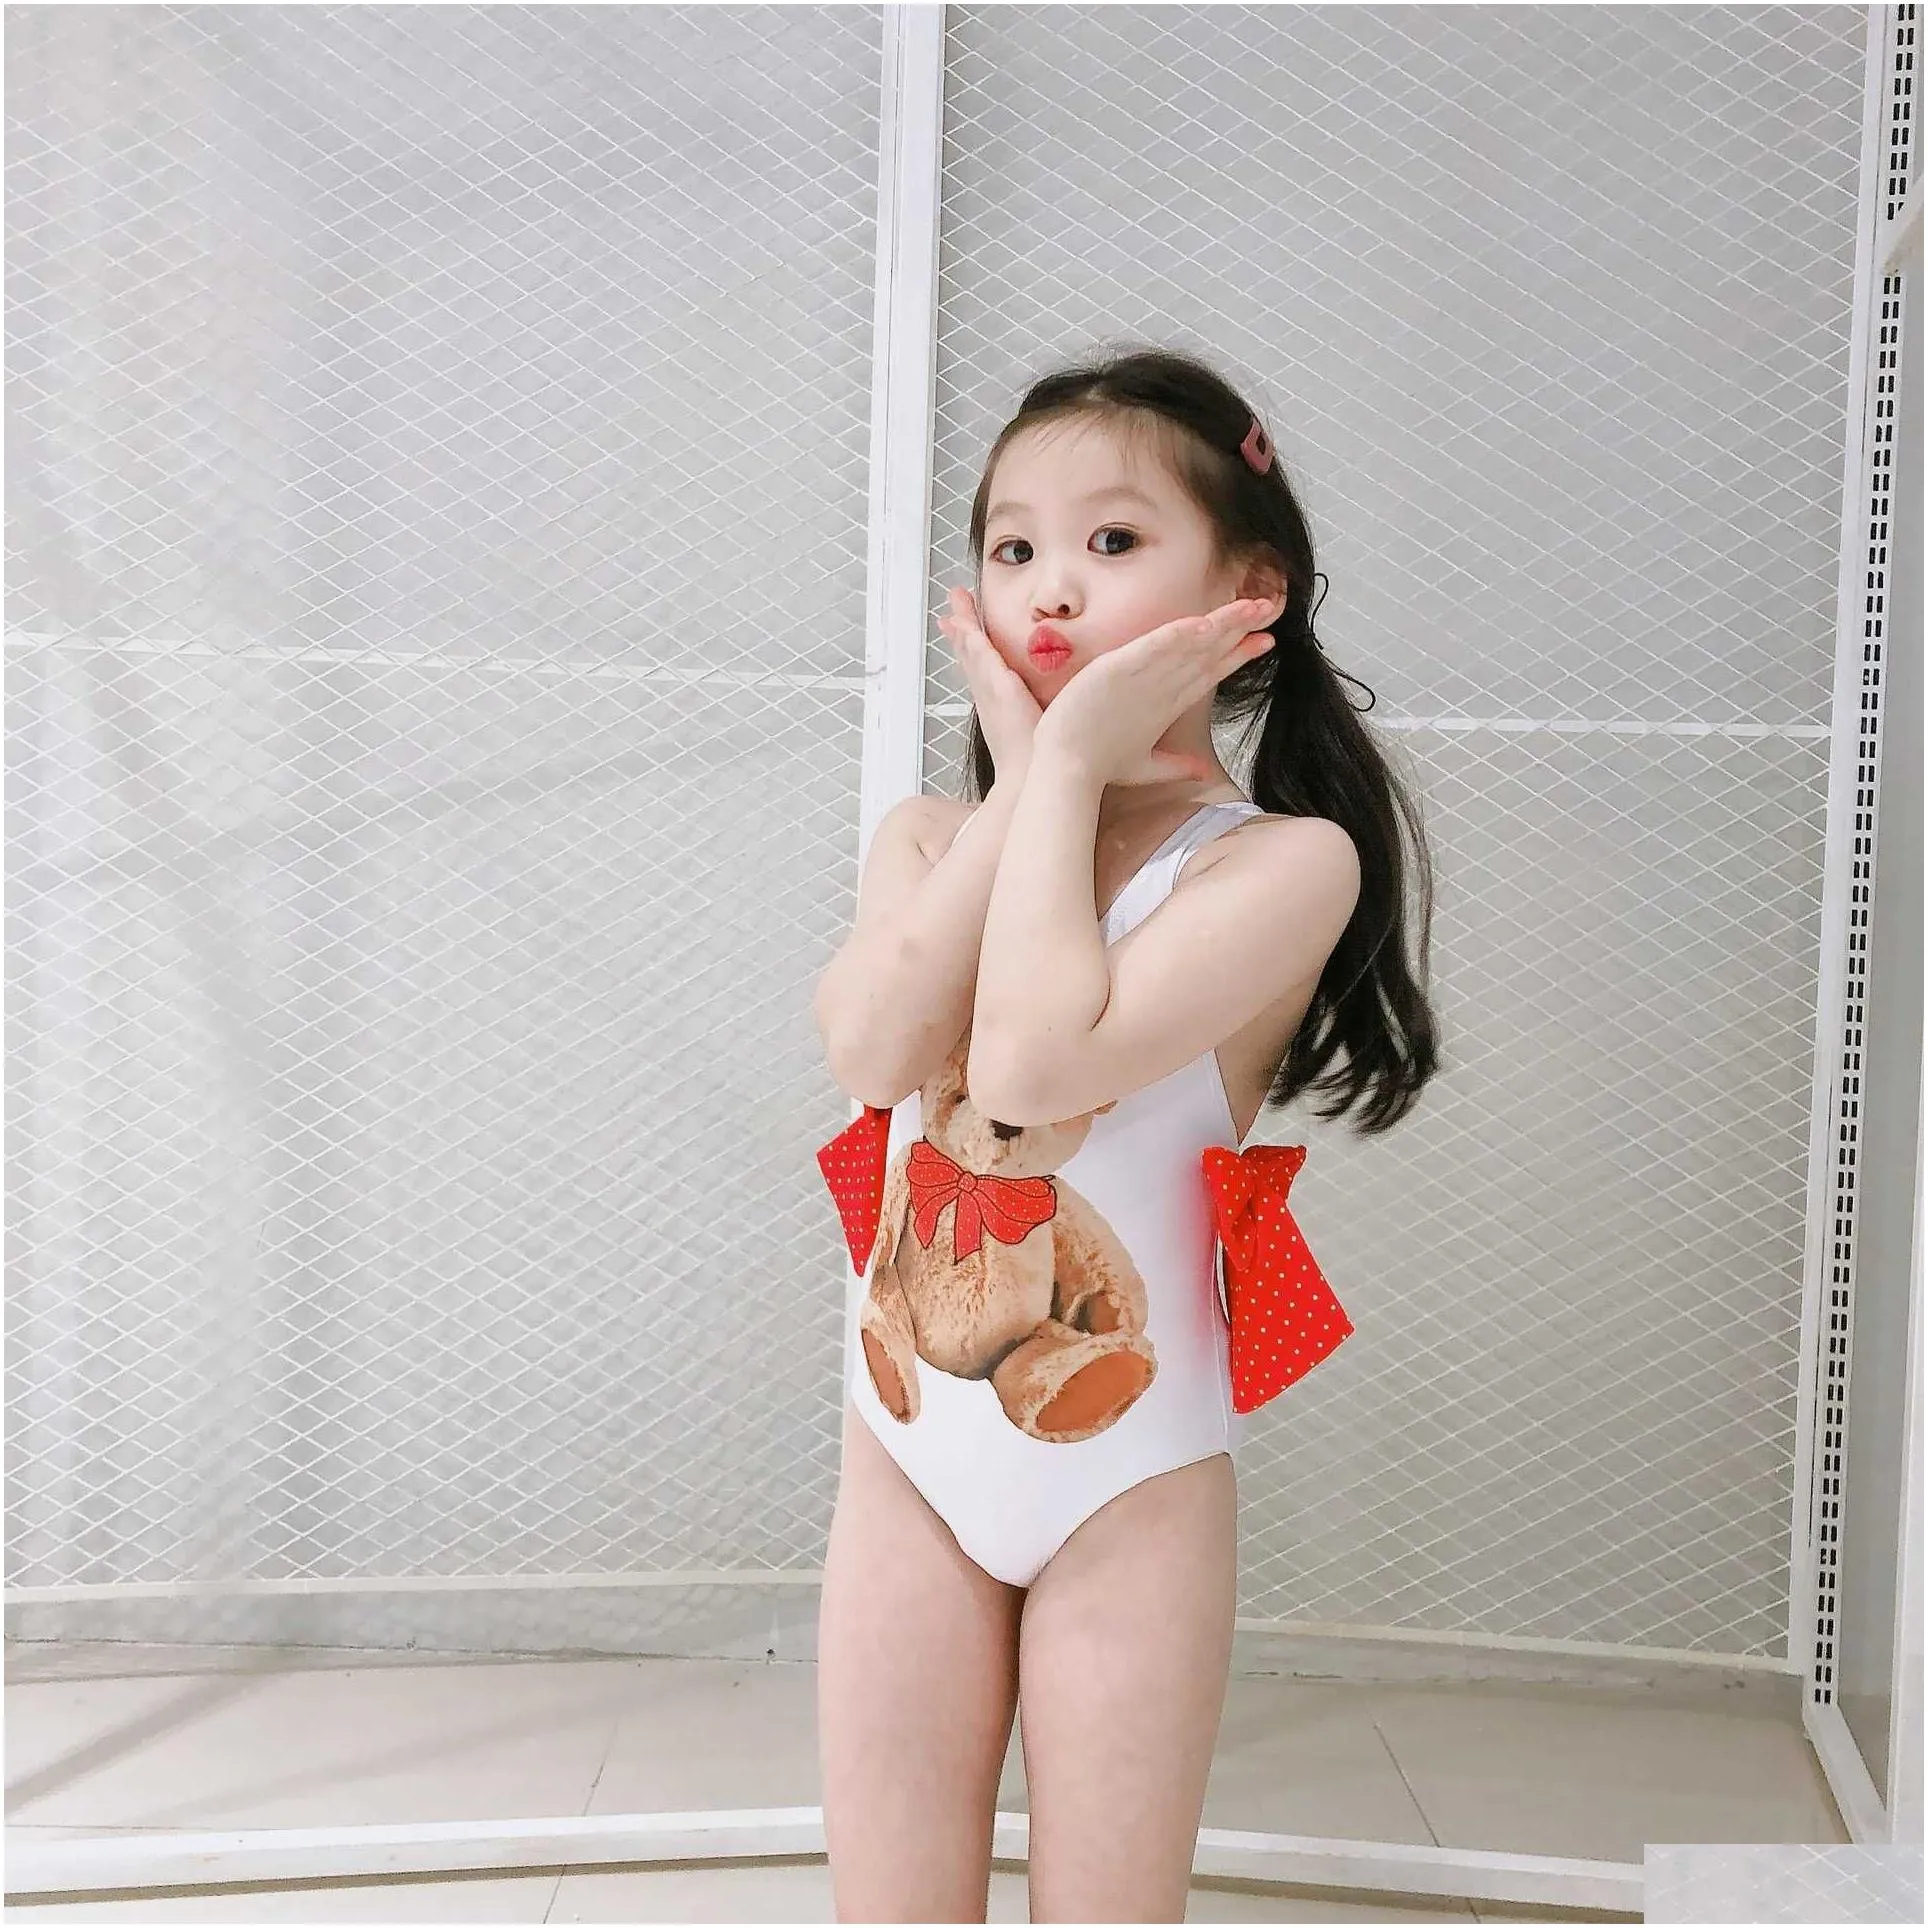 One-Pieces lovely bear baby girls swimwear ruffles bows swimsuit for kids toddler 12M cartoon bathing suit 210529